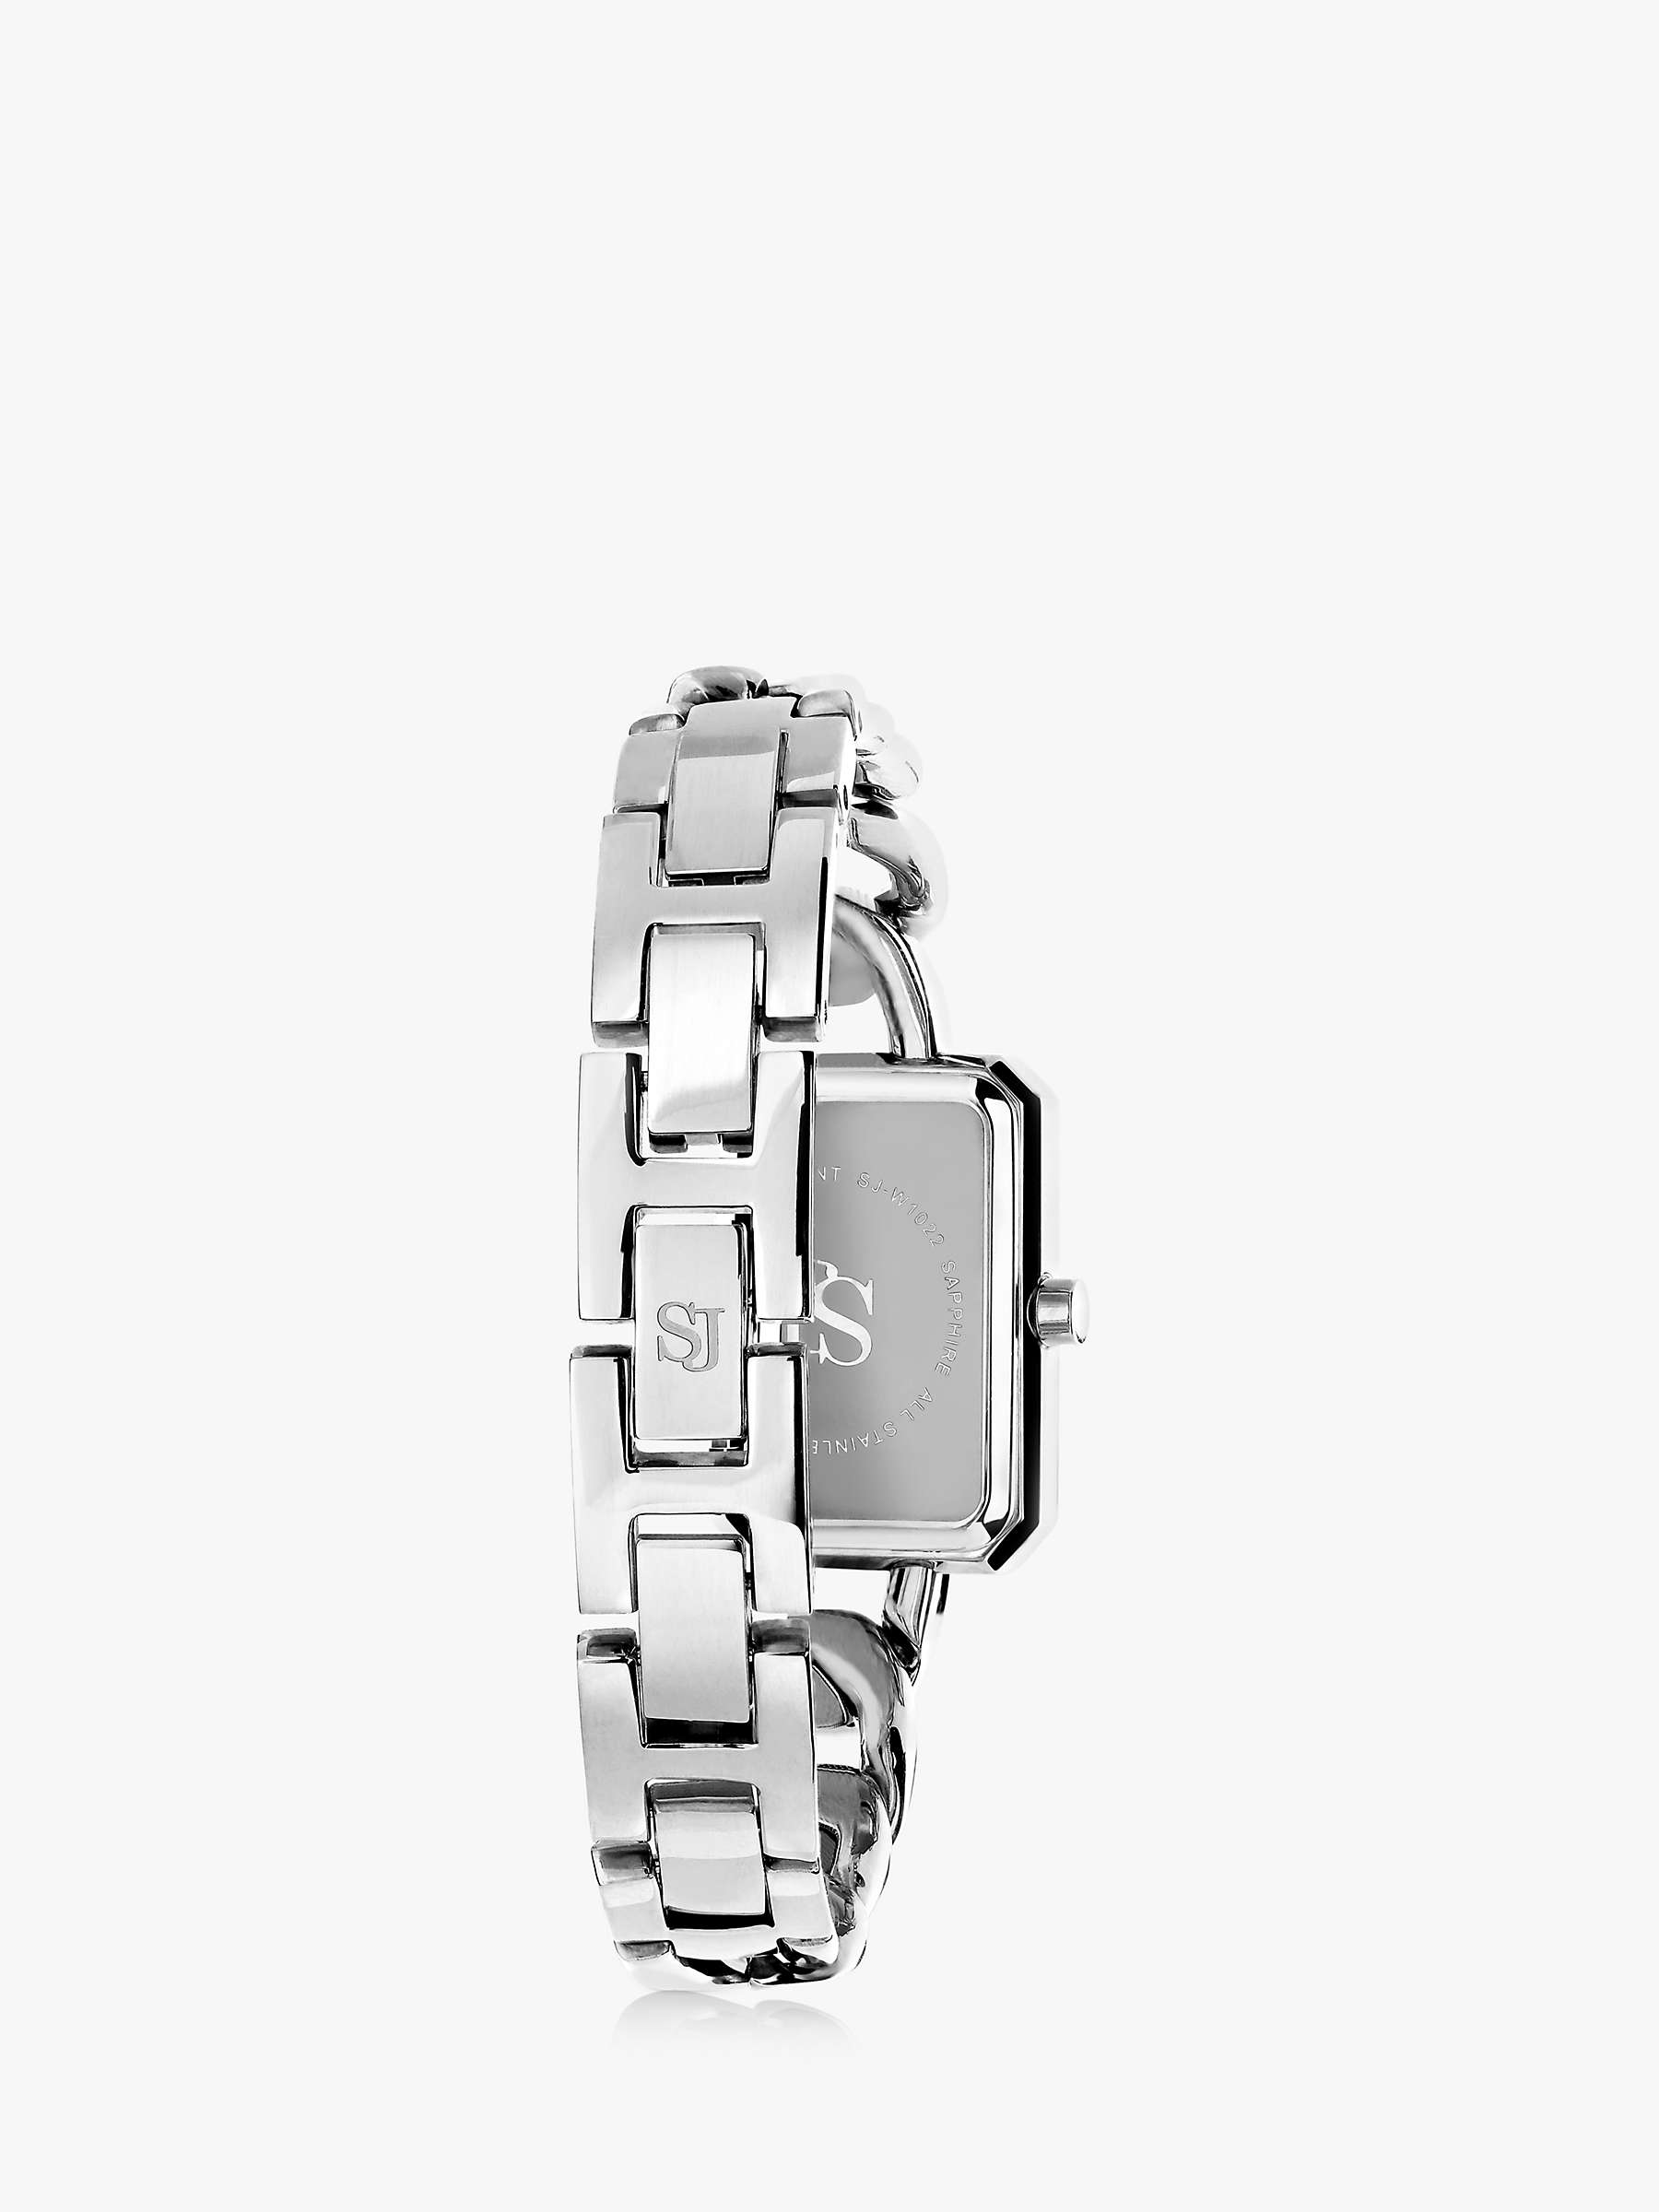 Buy Sif Jakobs Jewellery Gisella Sunray Dial Bracelet Watch, Silver Online at johnlewis.com